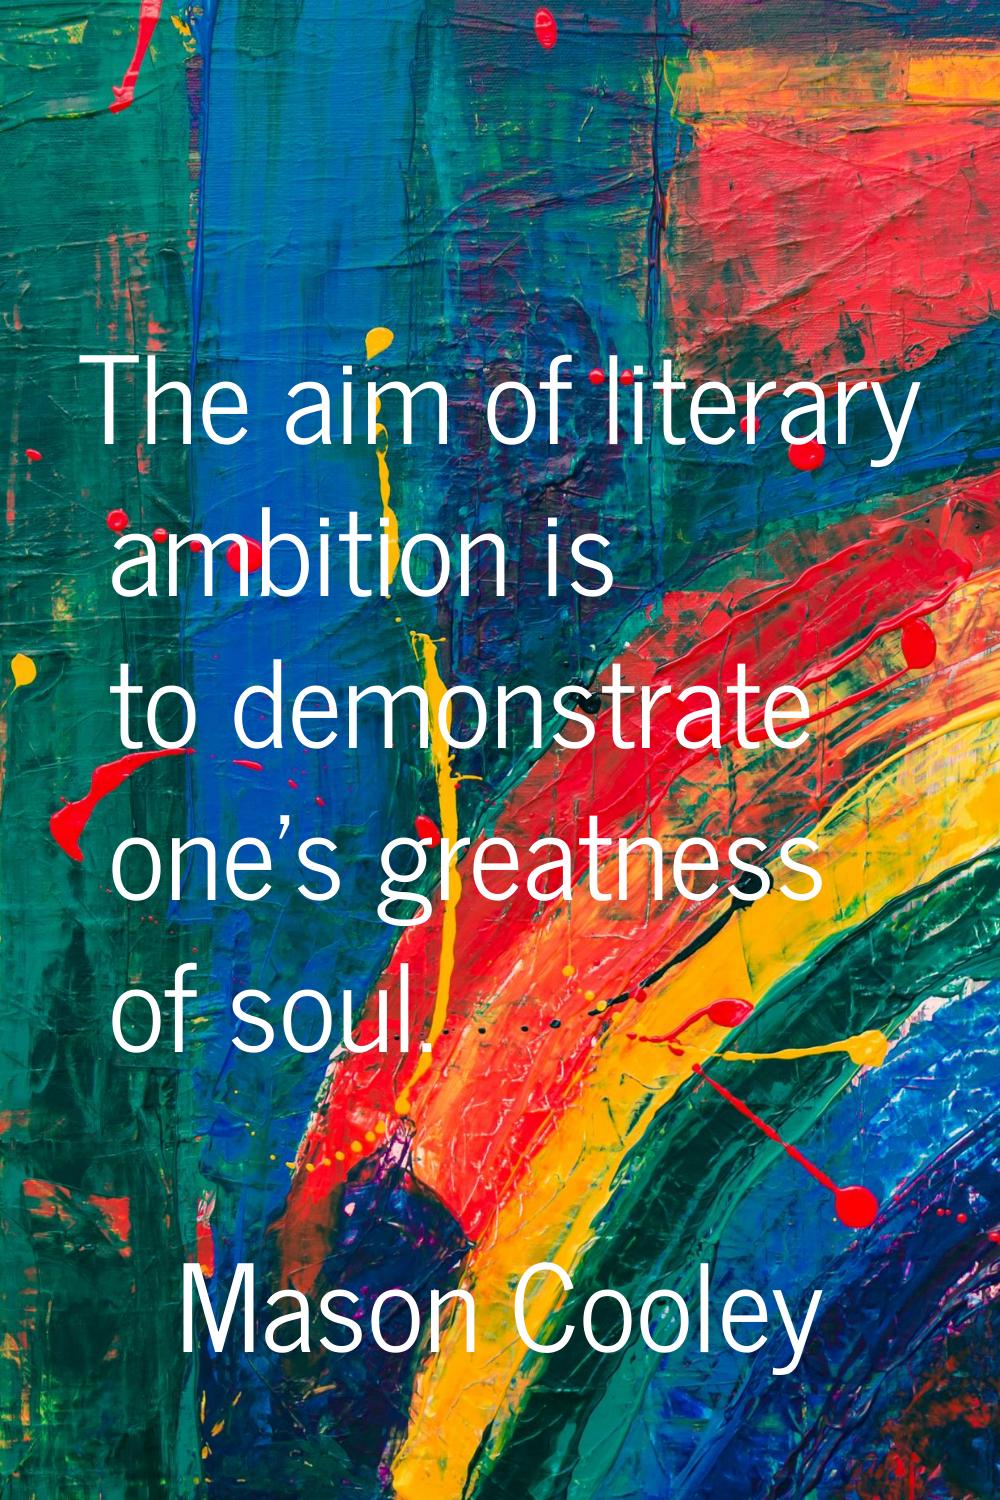 The aim of literary ambition is to demonstrate one's greatness of soul.